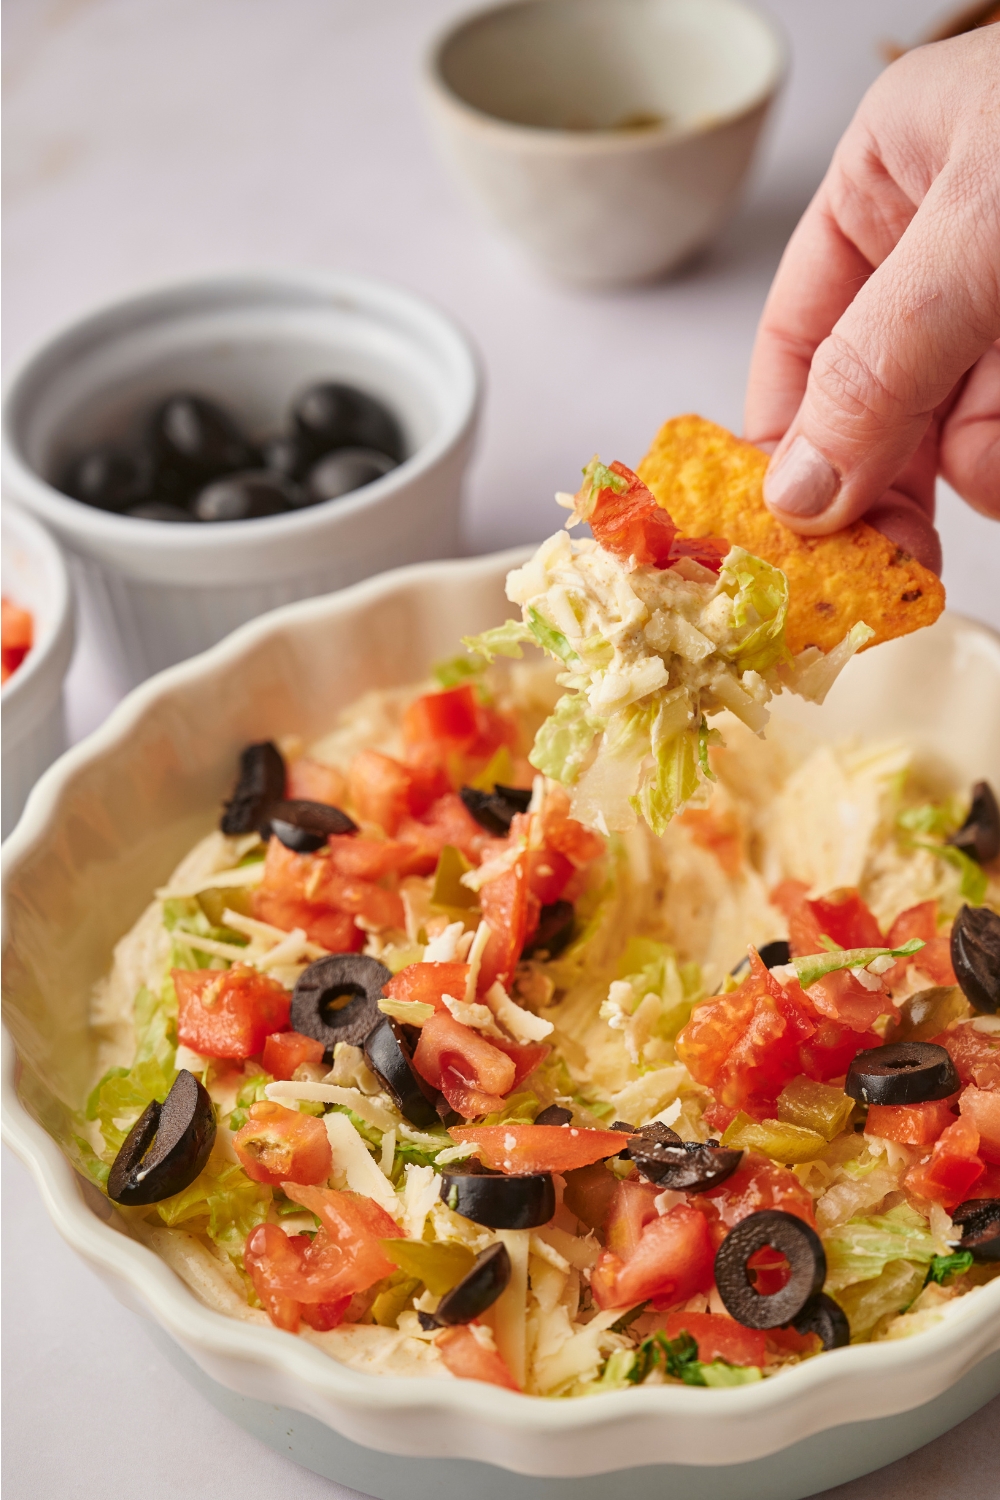 A servings dish with a cheesy tortilla chip being dipped into taco dip.